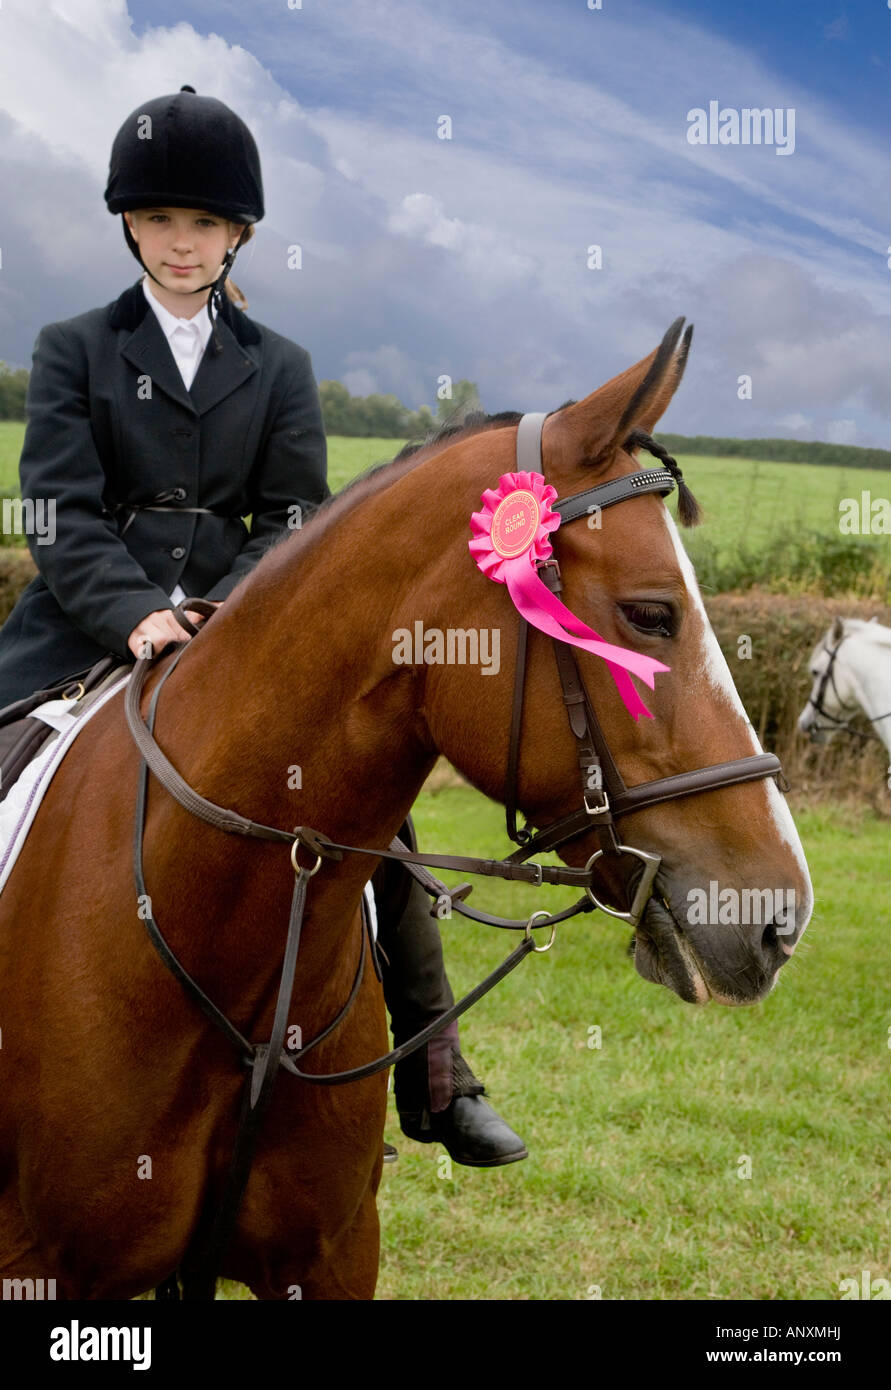 YOUNG GIRL IN RIDING OUTFIT WITH PONY AND AWARD ROSETTE Stock Photo